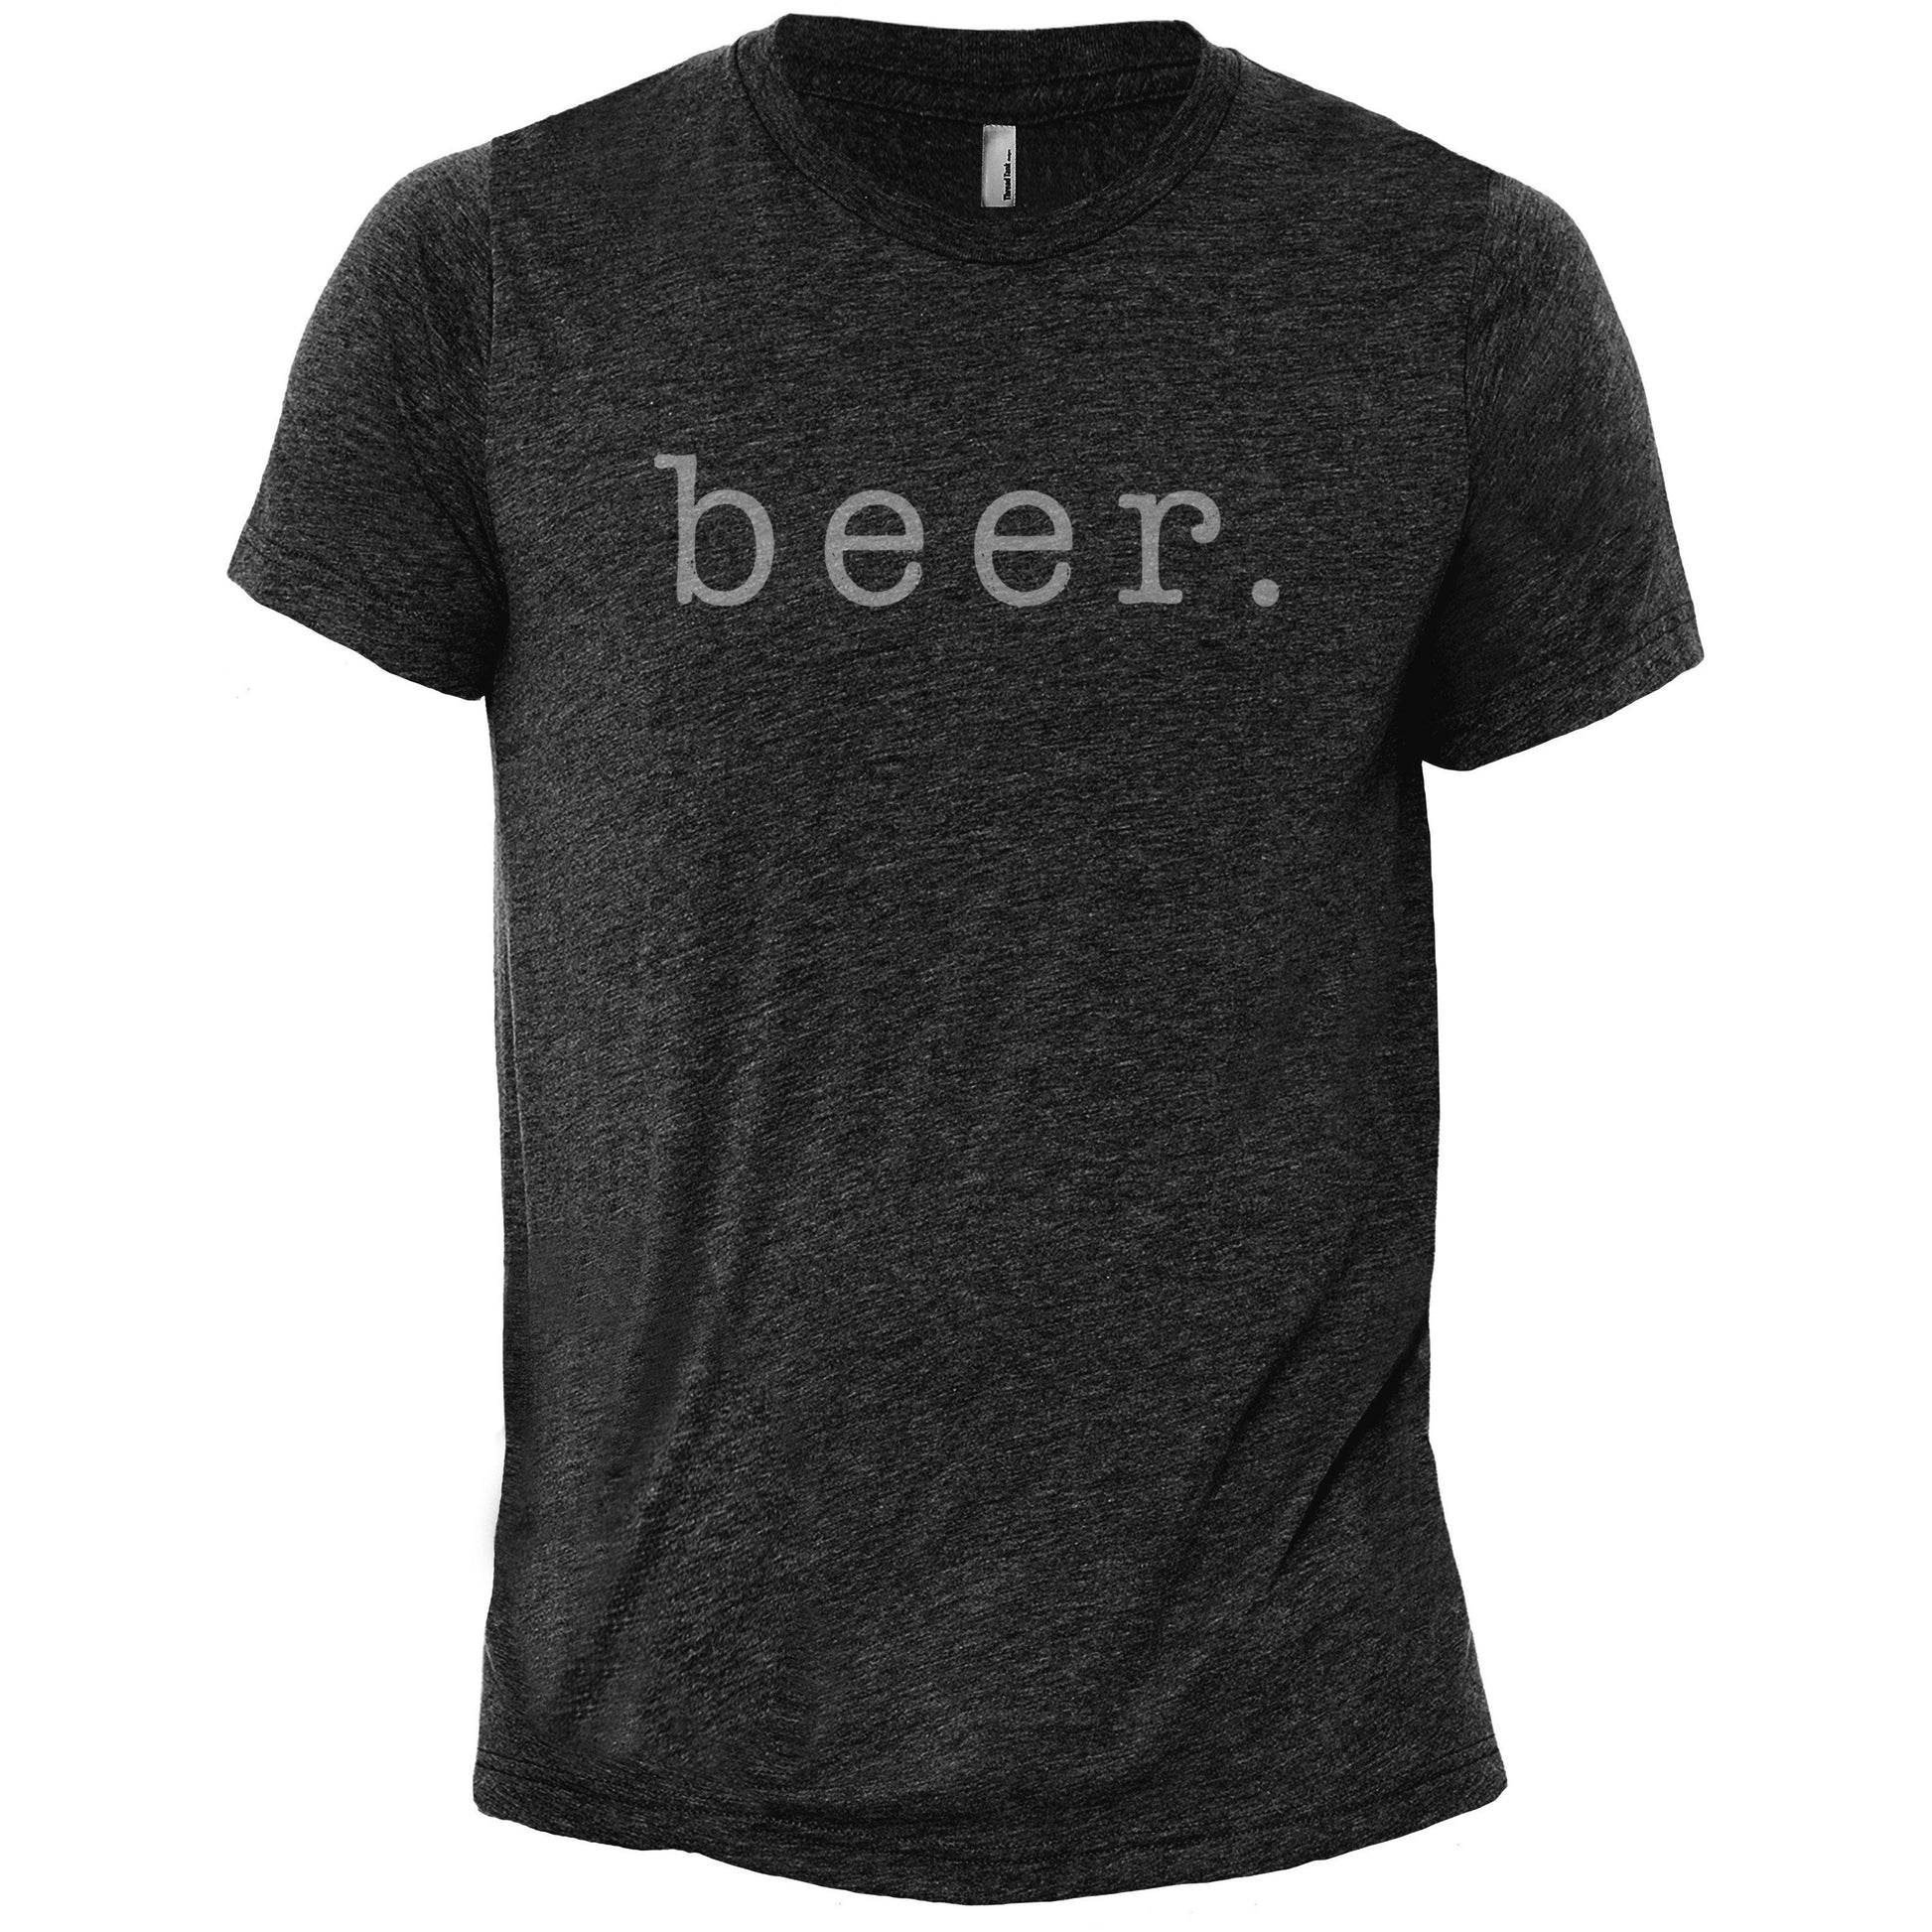 Beer - Stories You Can Wear